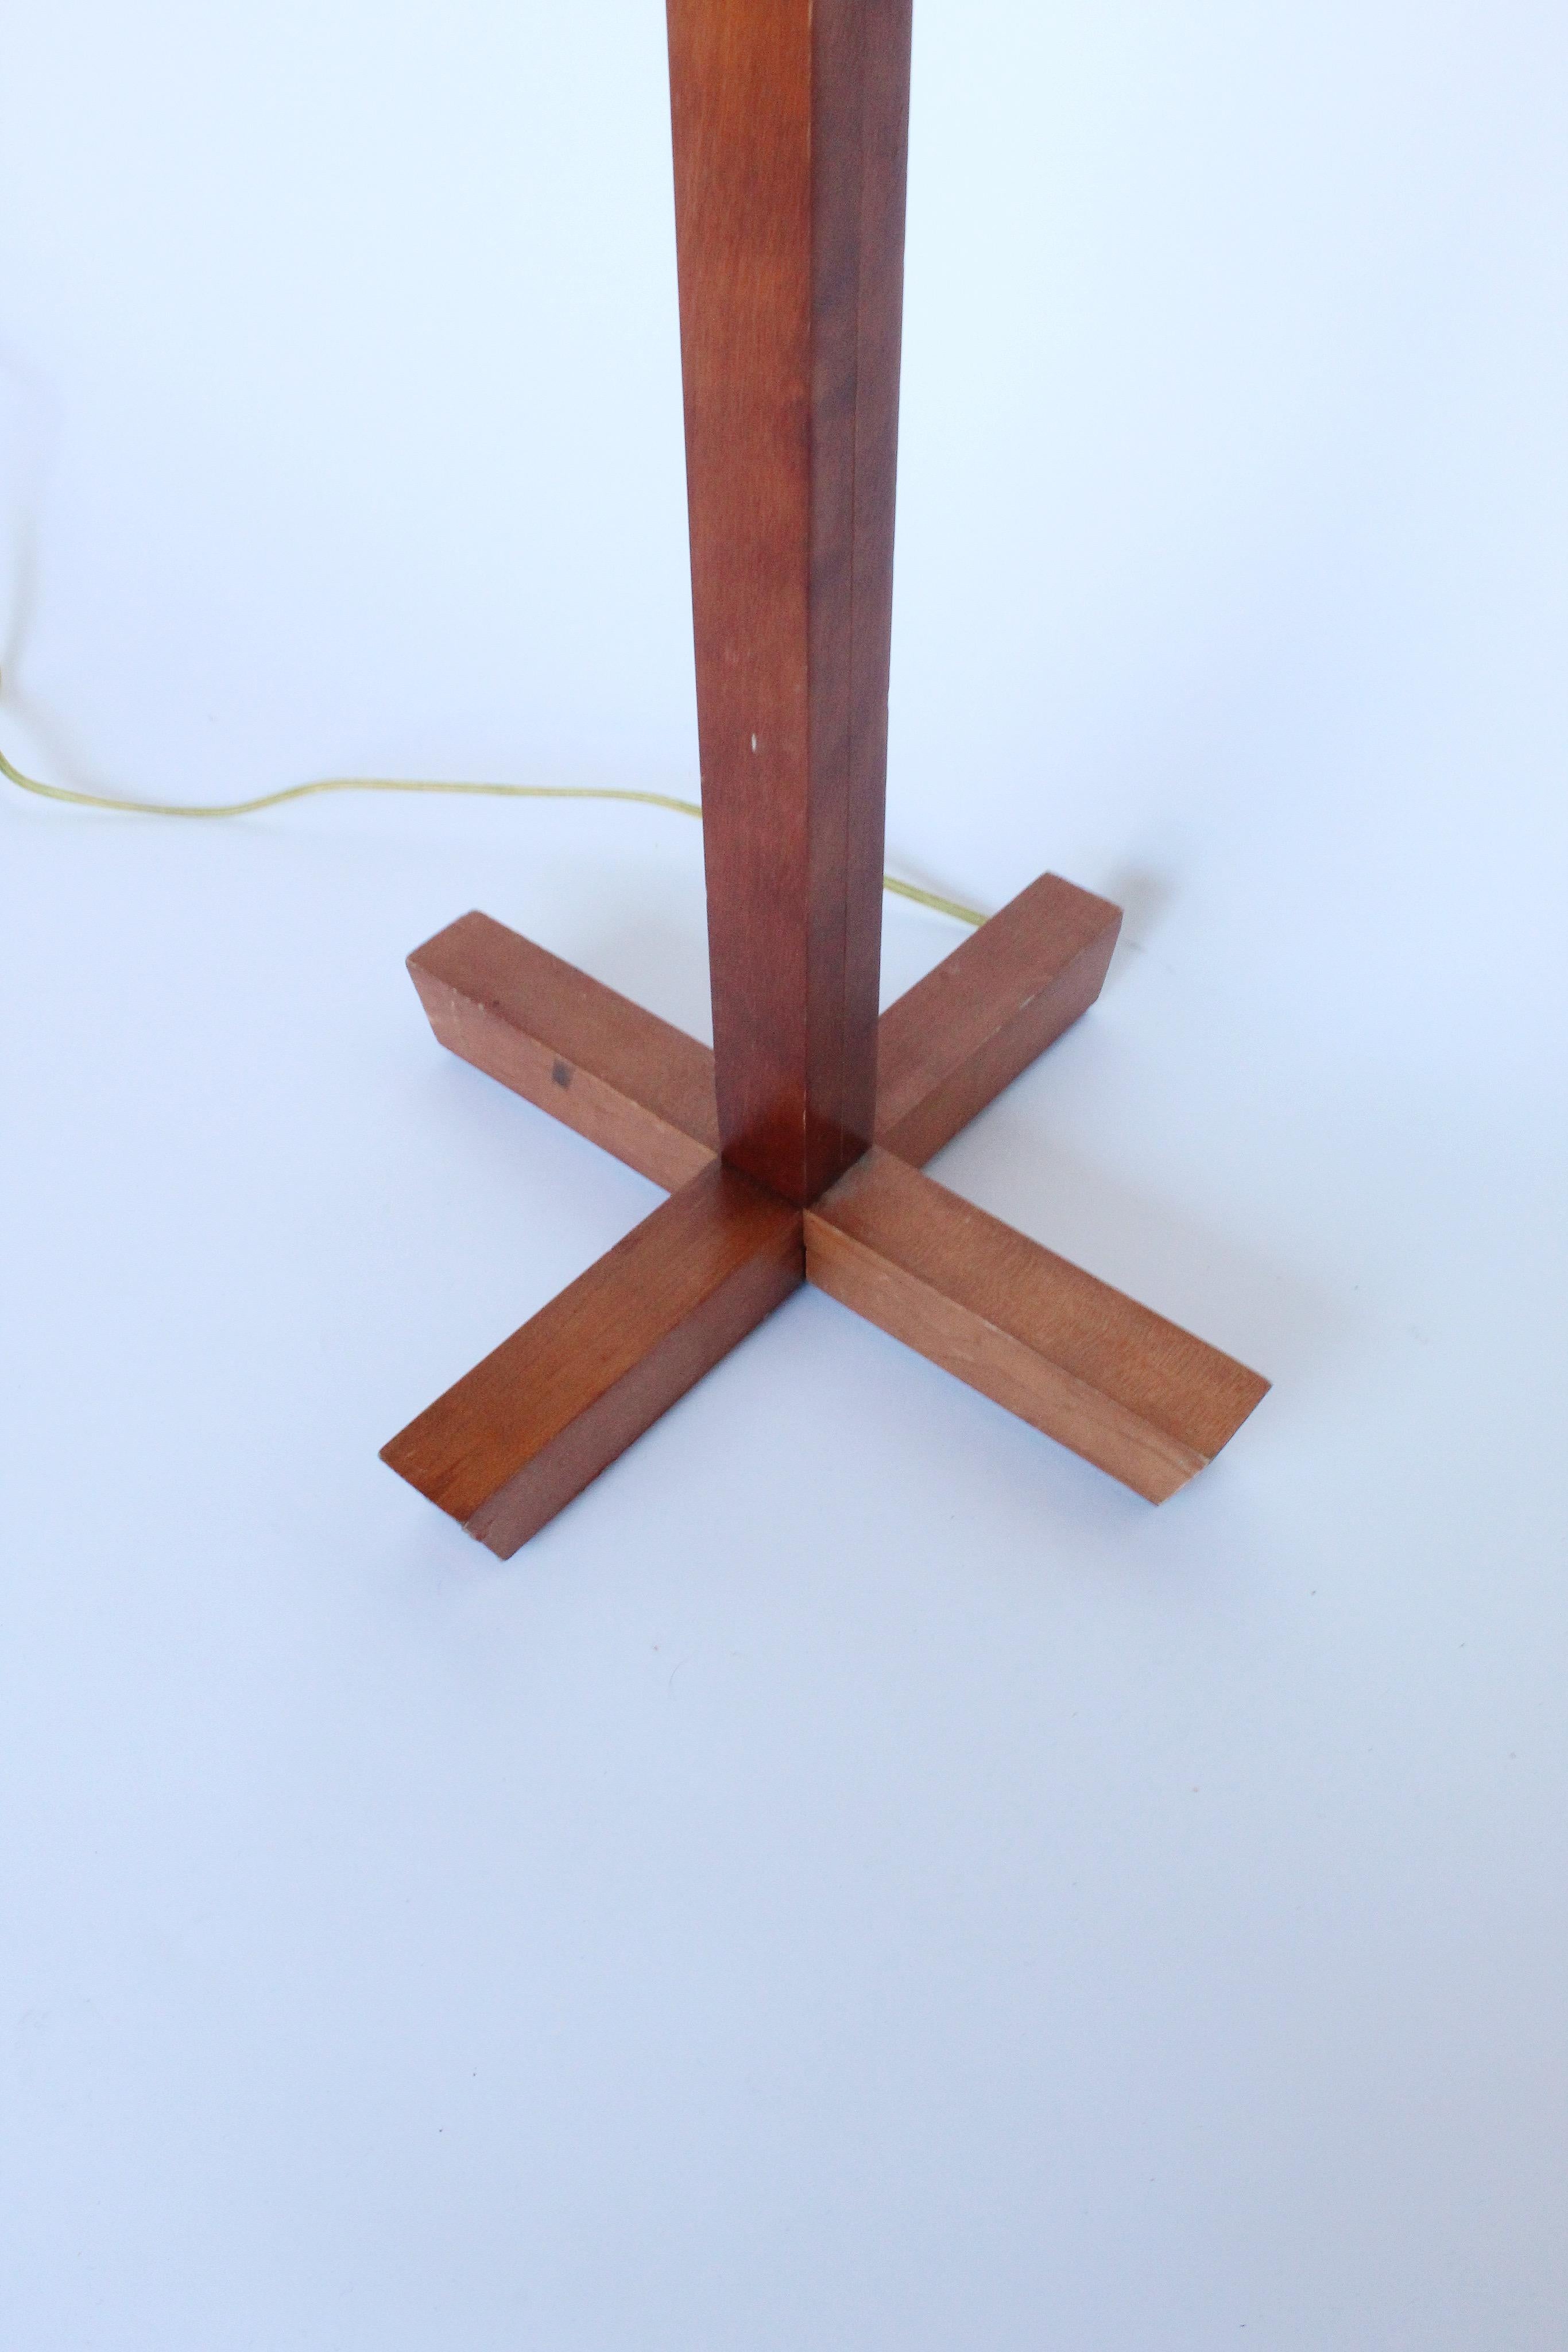 American Arts & Crafts Floor Lamp in the Style of Frank Lloyd Wright